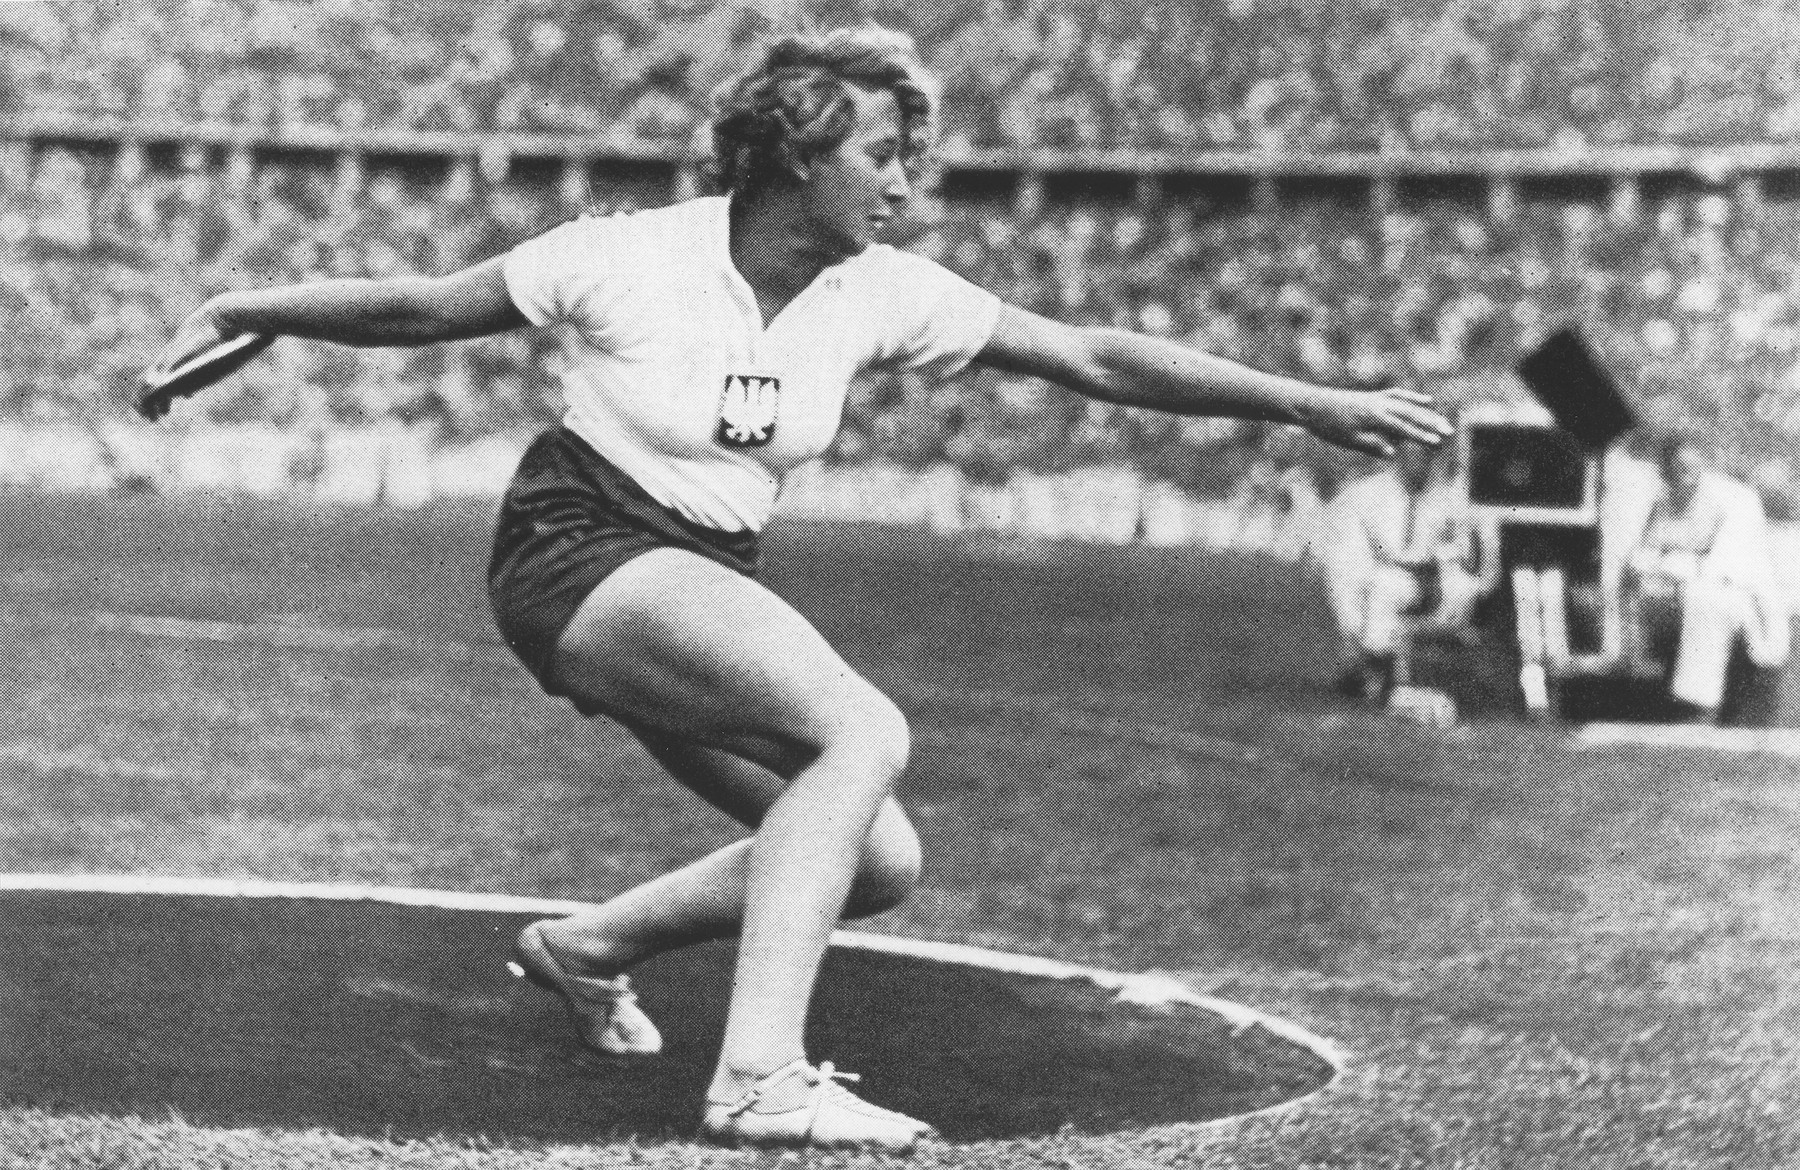 Polish athlete Jadwiga Wajsowna competes in the discus throwing event at the 11th Summer Olympic Games in Berlin. She finished second.